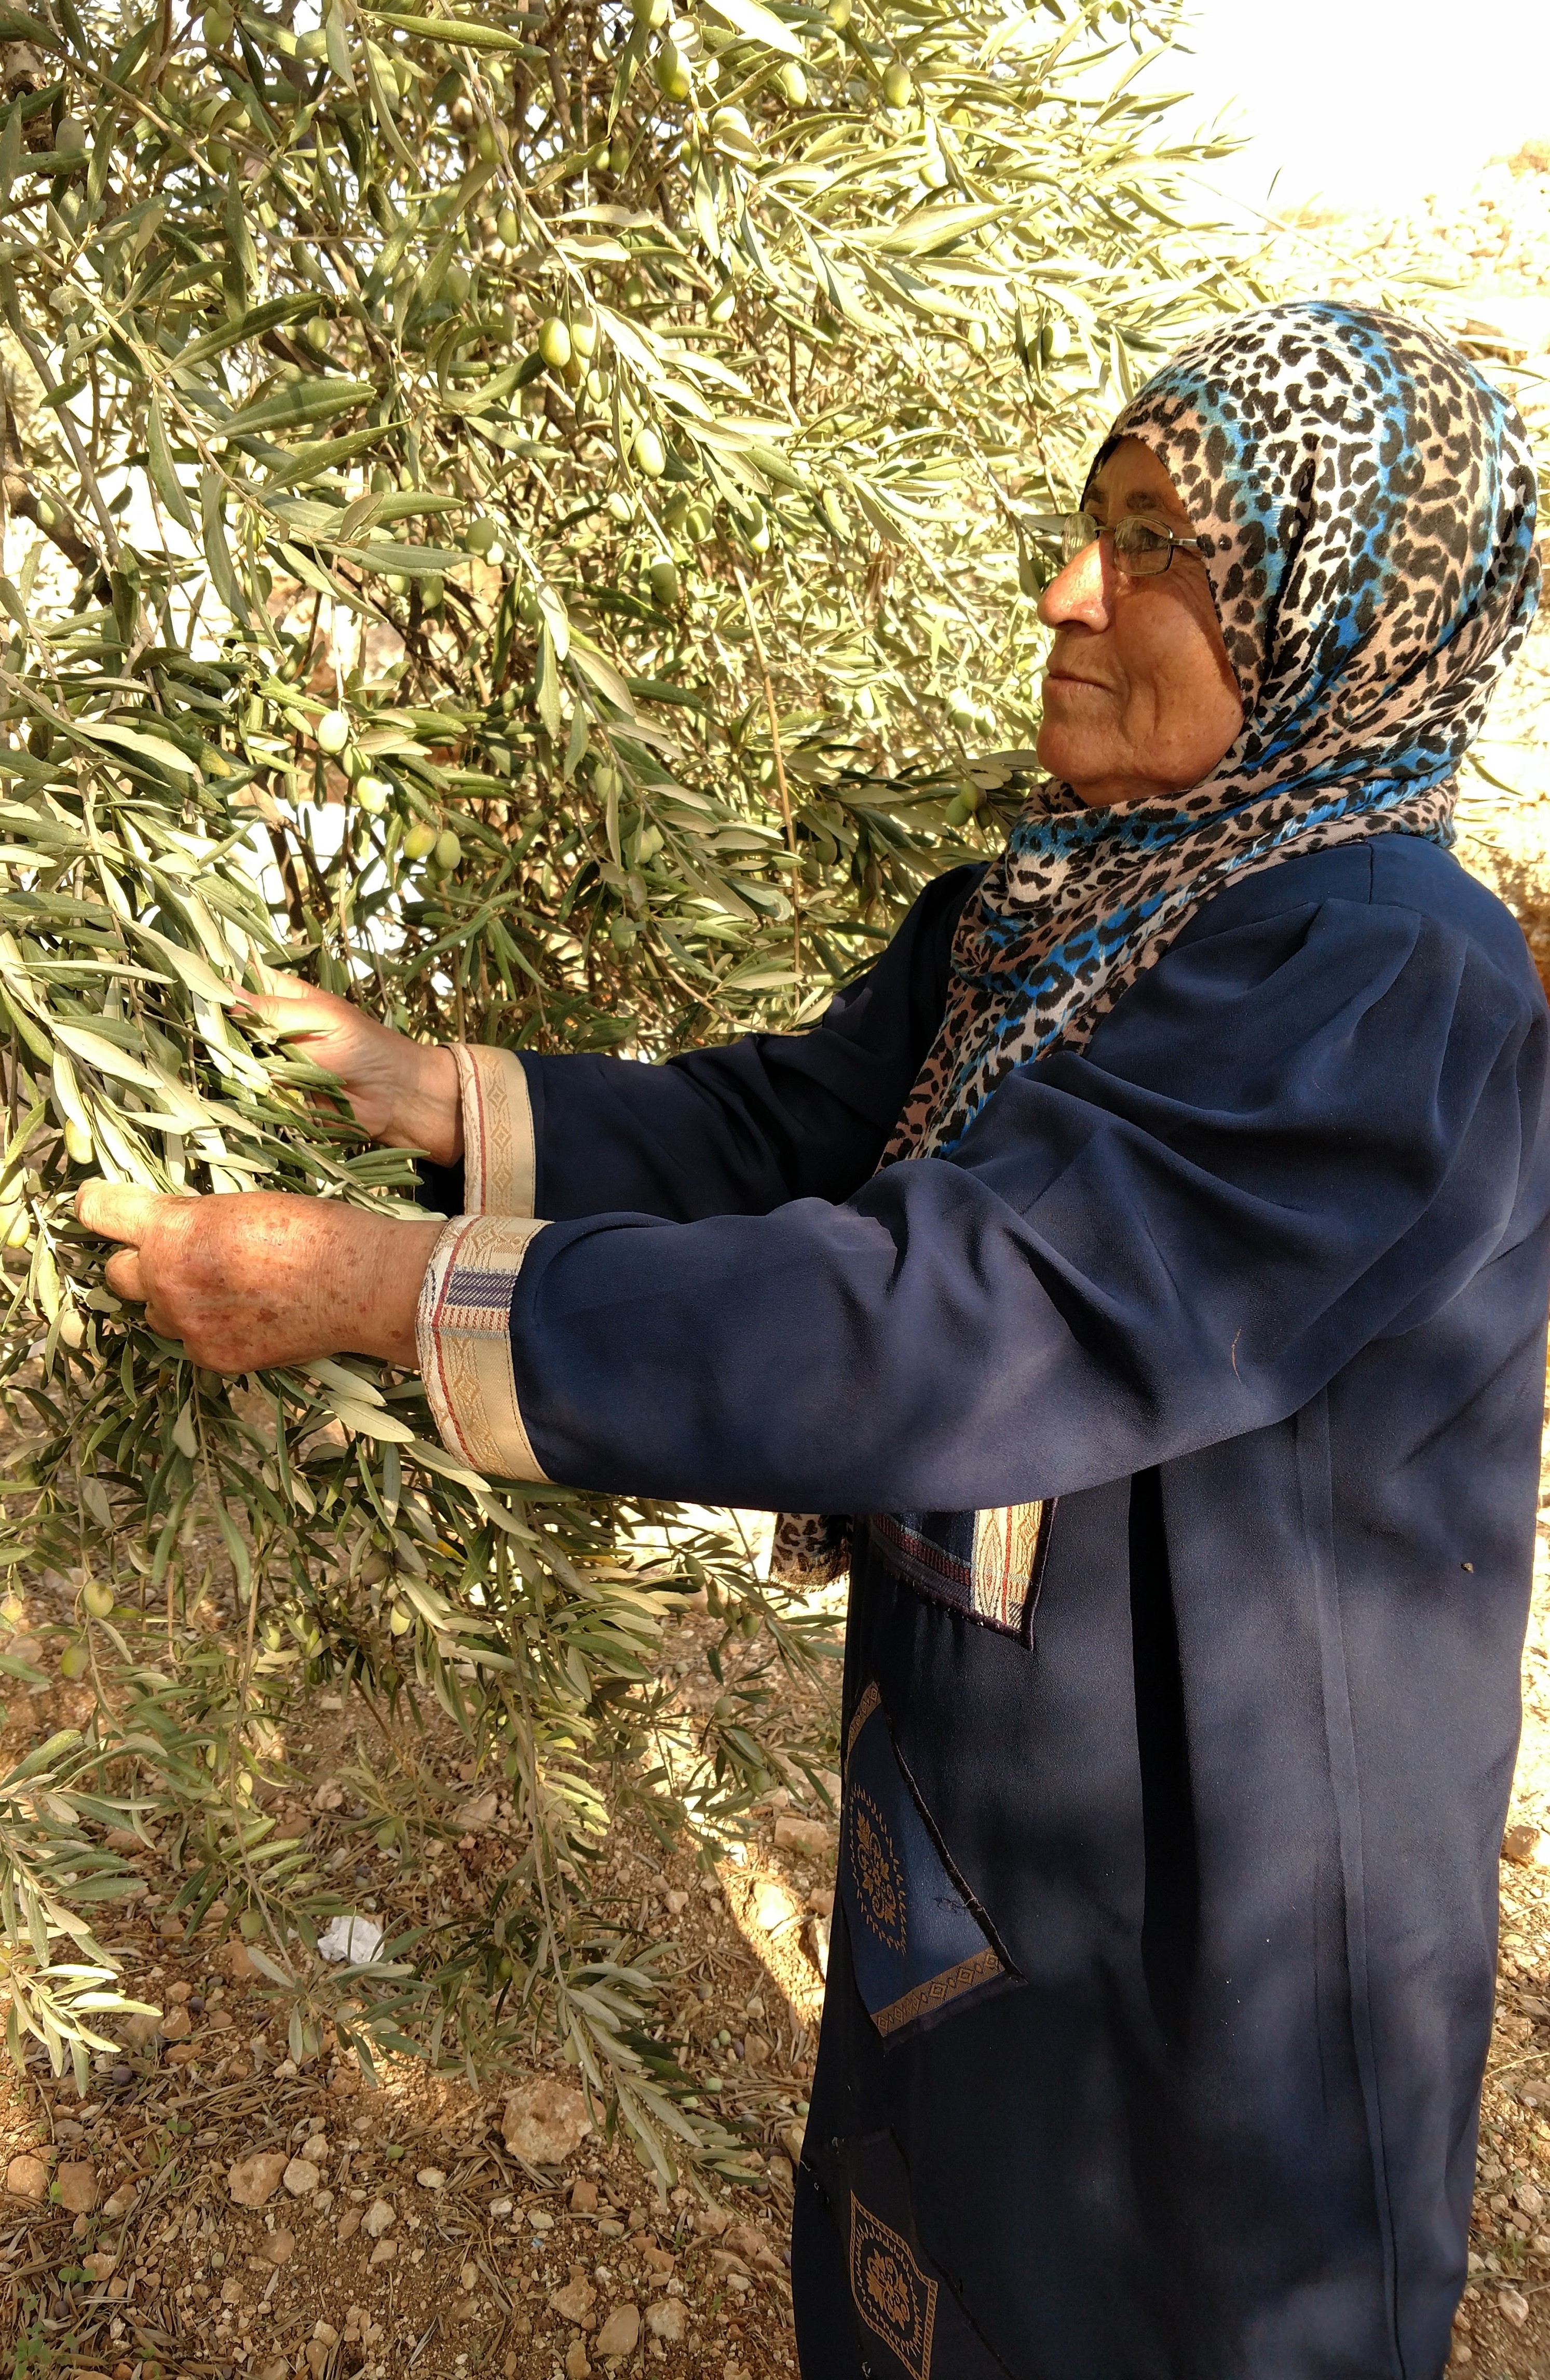 A woman picks olives from a tree in the West Bank